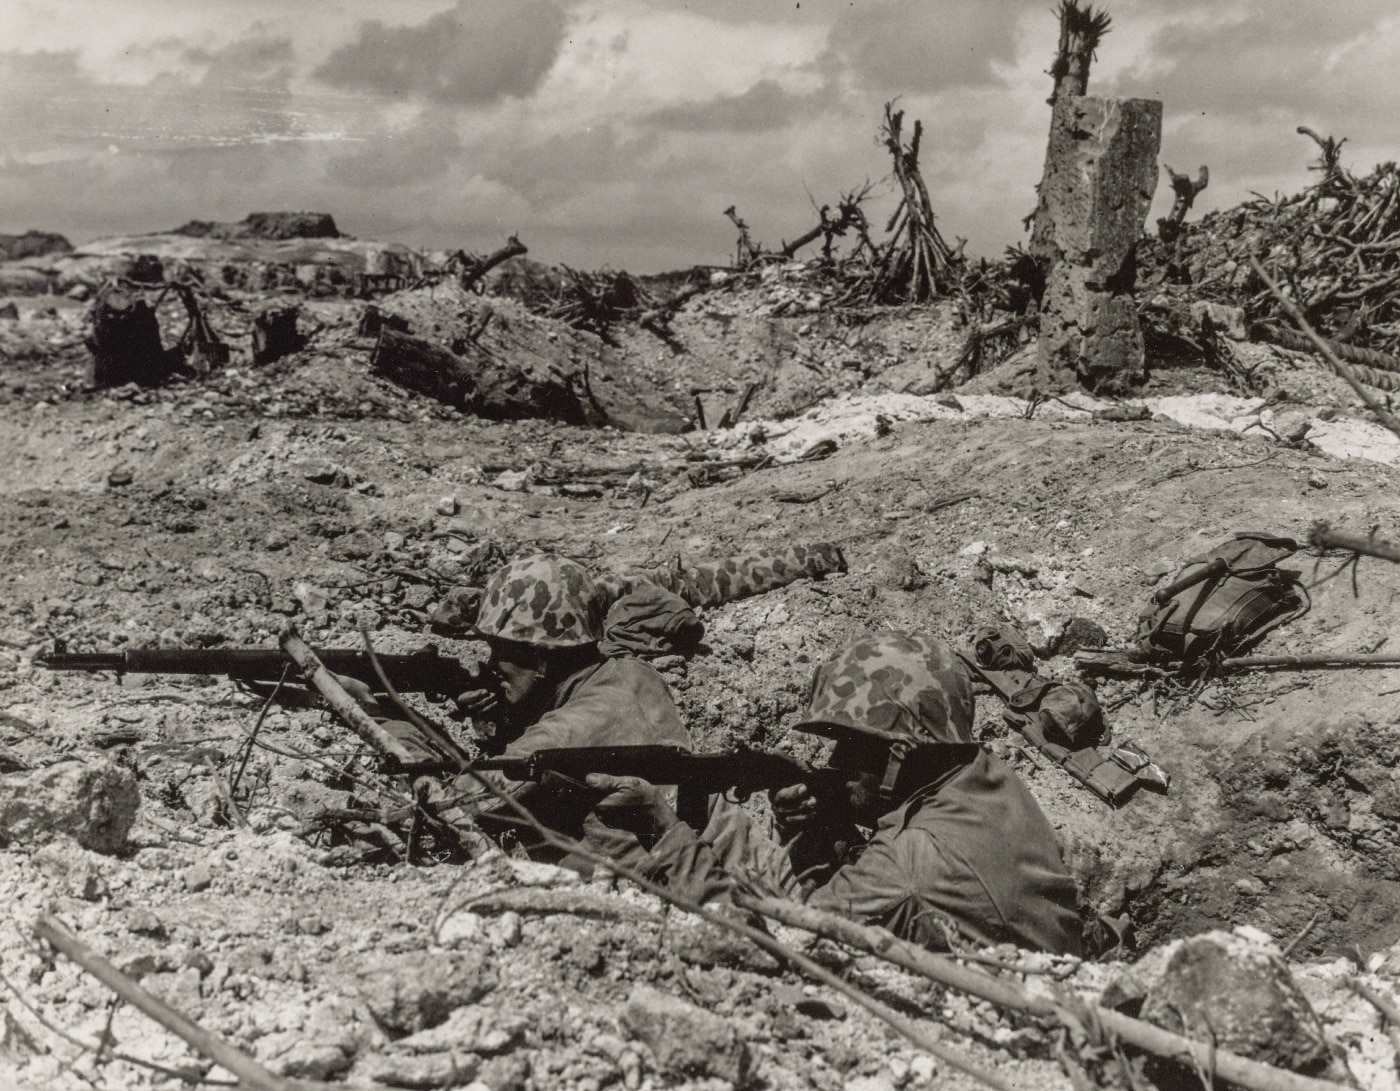 In this photo, two Marine infantrymen stay low in their trench while U.S. Navy ships continue the bombardment of the volcano island. Part of the United States Armed Forces amphibious warfare strategy, naval warfare typically included the use of battleship artillery hitting the blockhouse and pillboxes used by the Imperial Japanese Army.